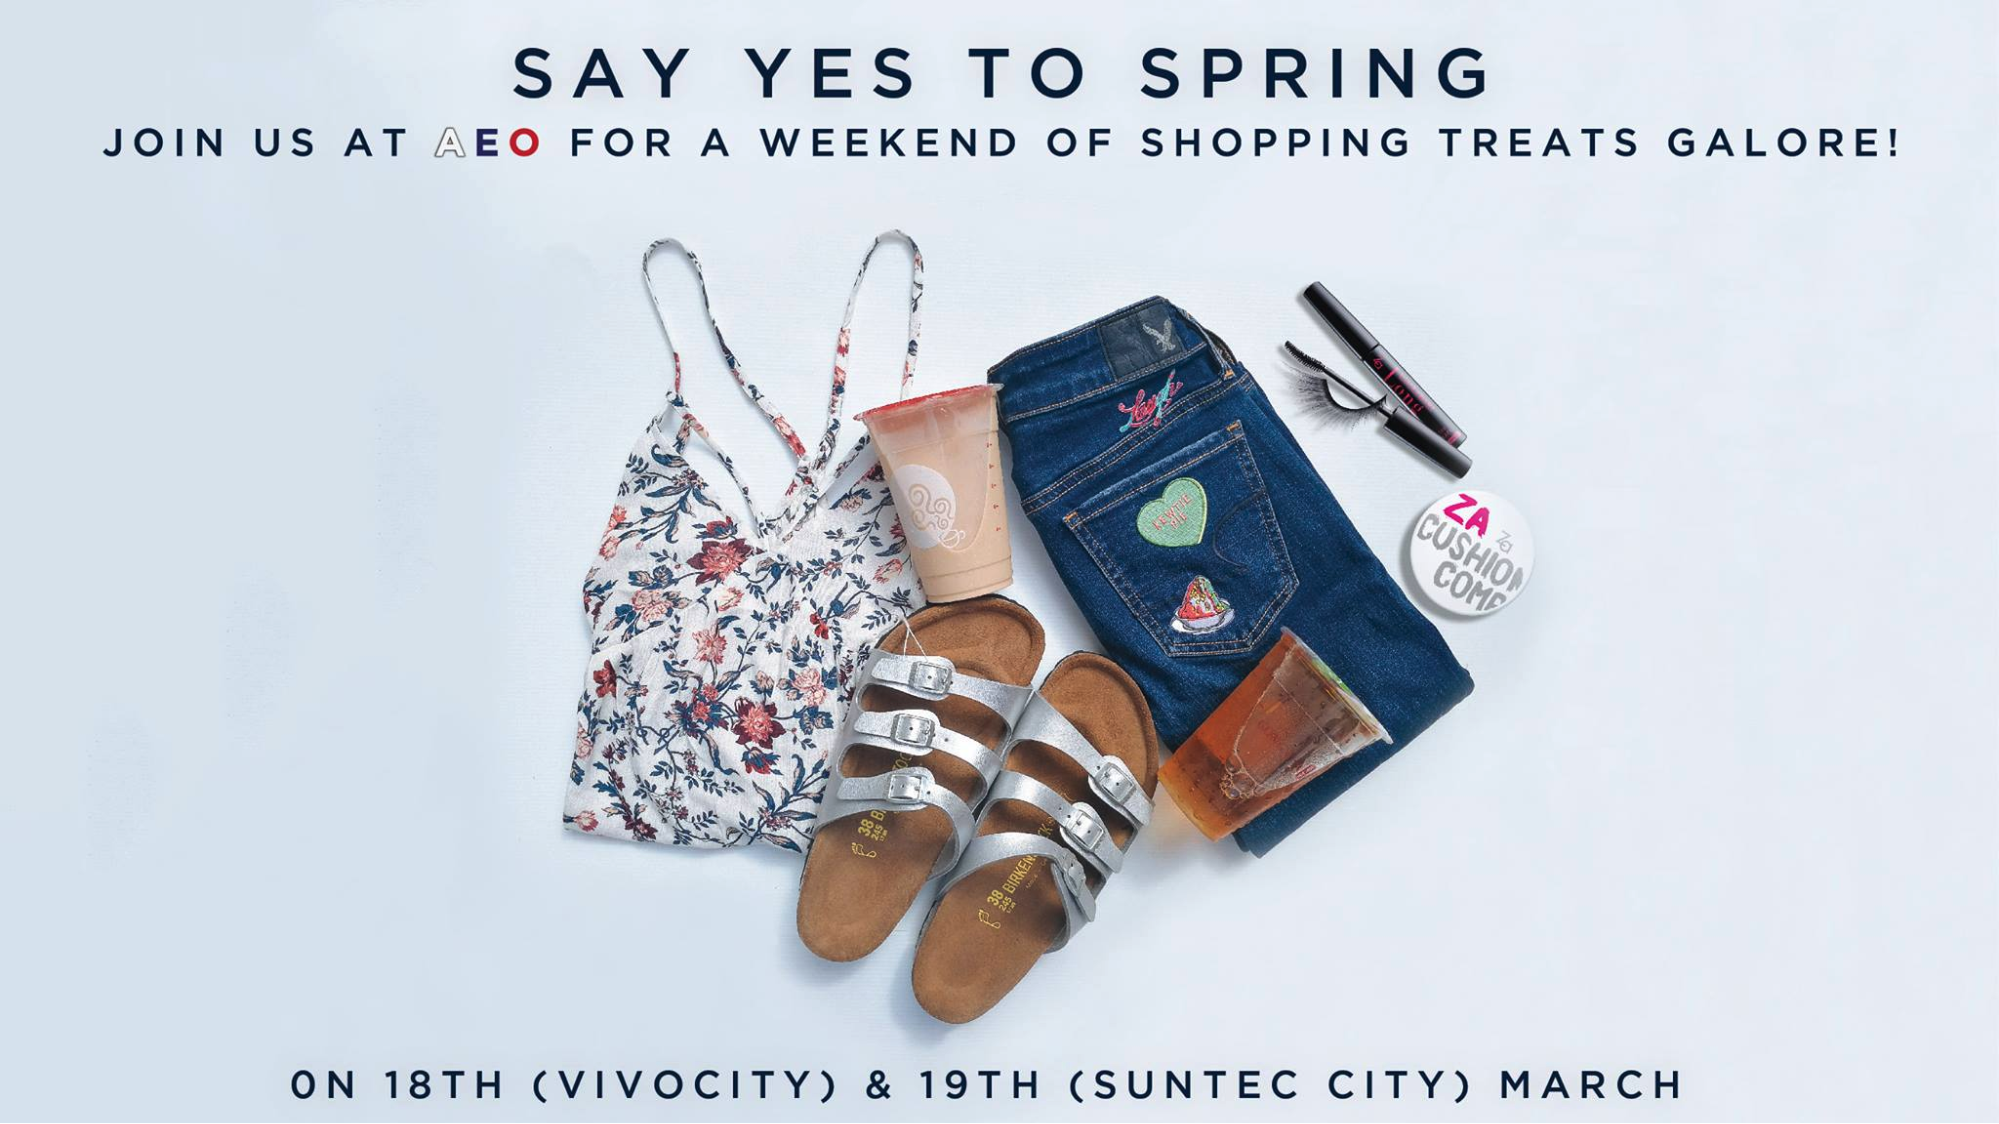 American Eagle Outfitters' is having a spring event full of attractive promotions and goodies!